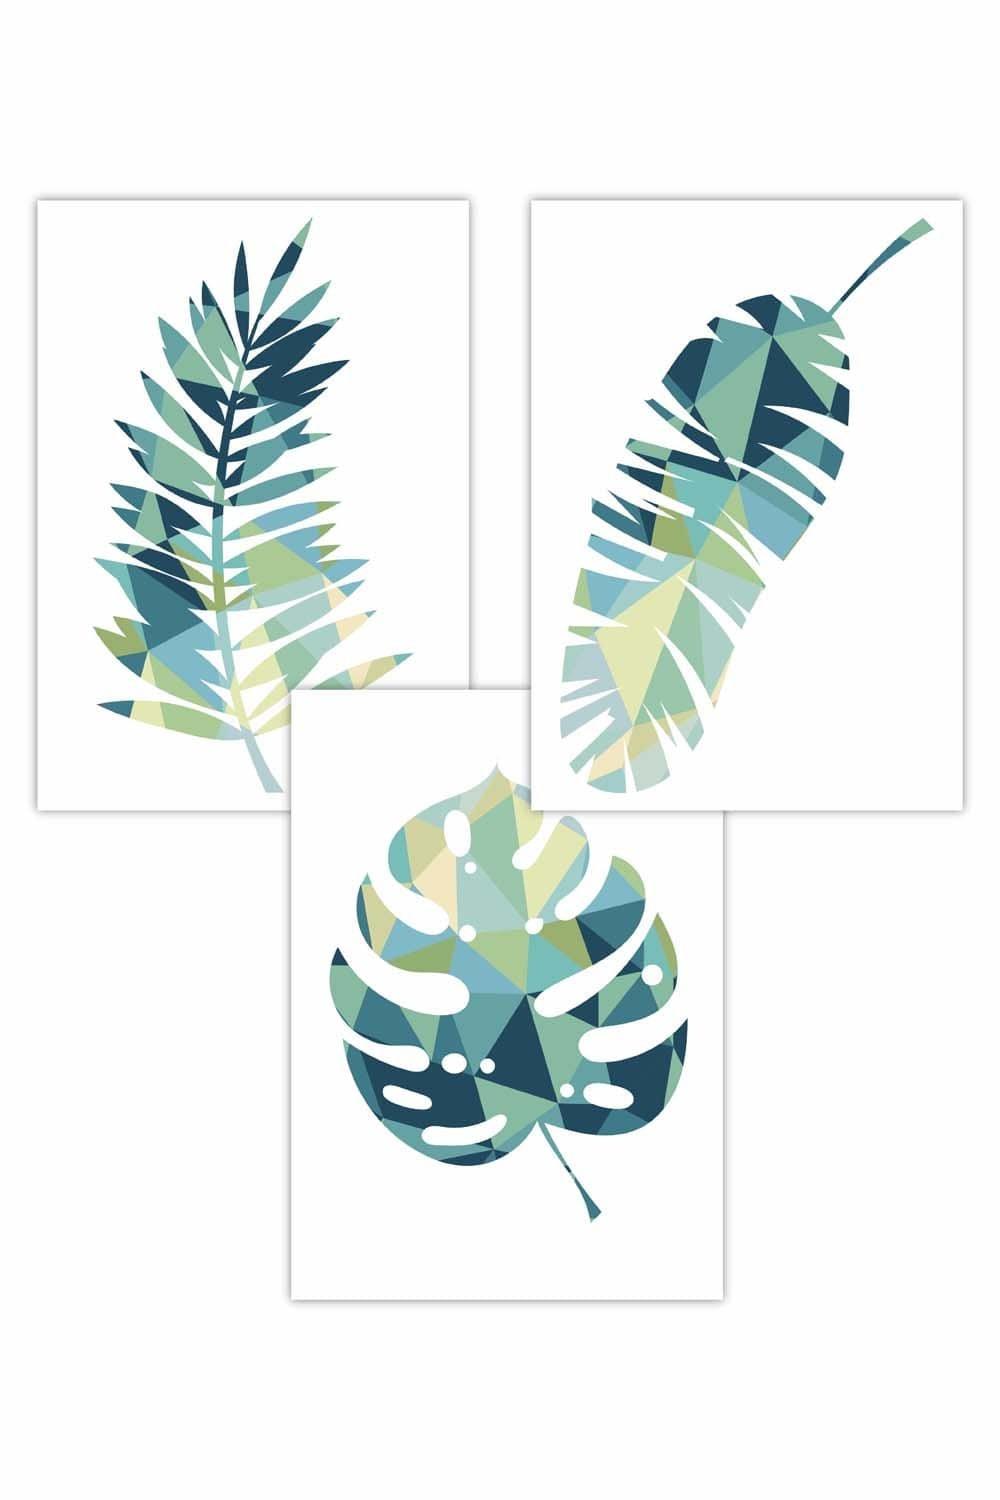 Set of 3 Geometric Tropical Leaves In Teal Blue Green Art Posters